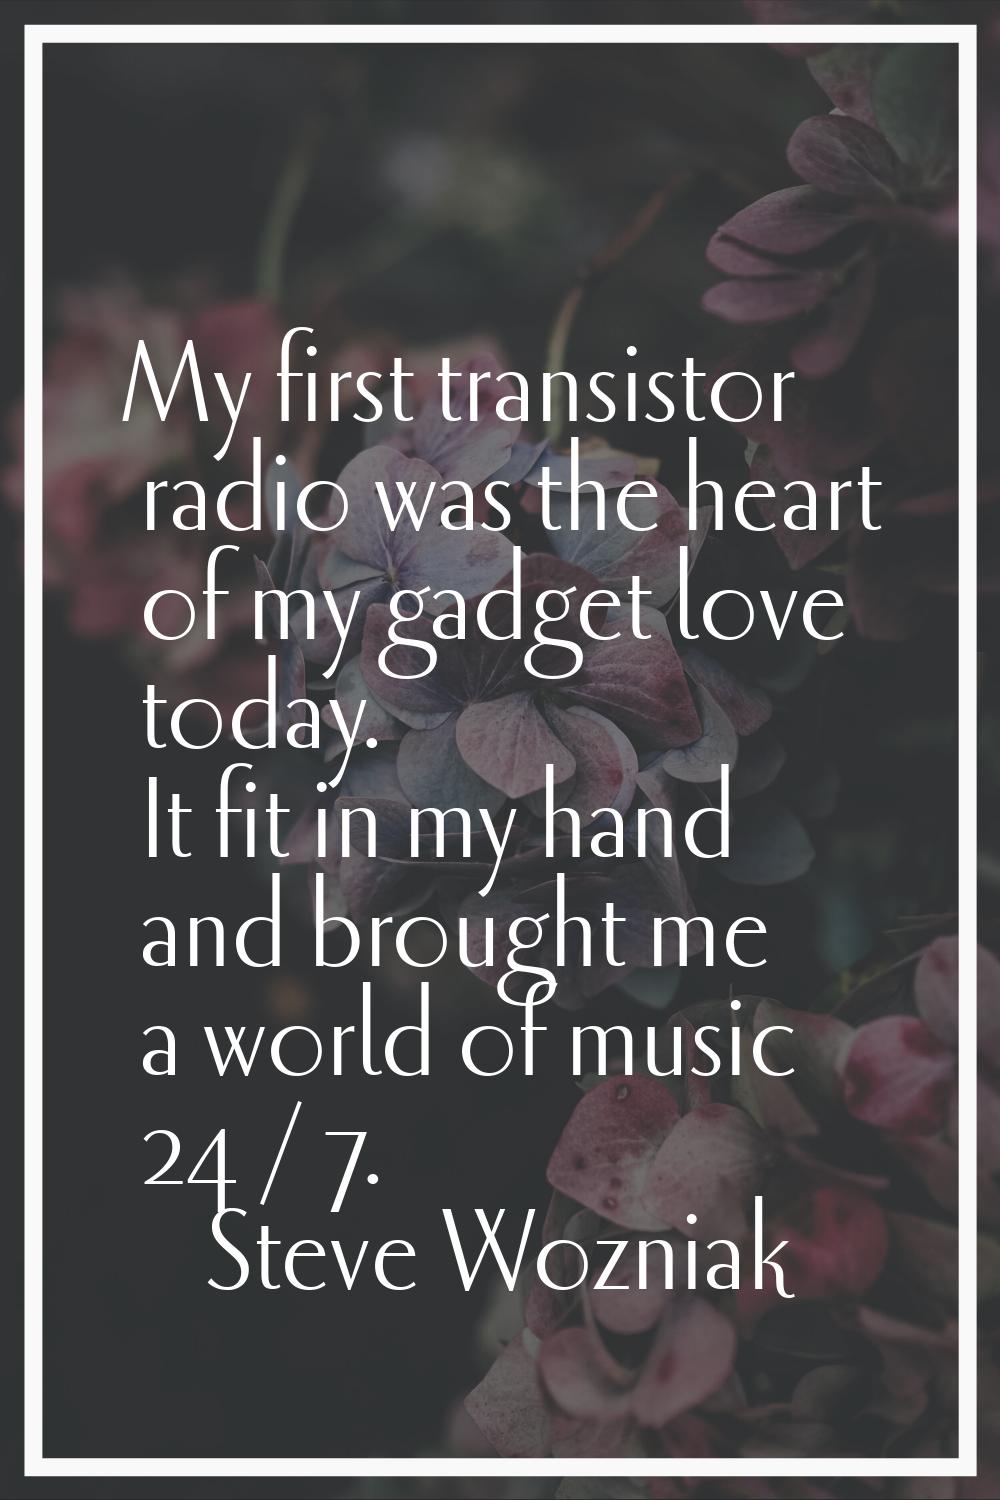 My first transistor radio was the heart of my gadget love today. It fit in my hand and brought me a